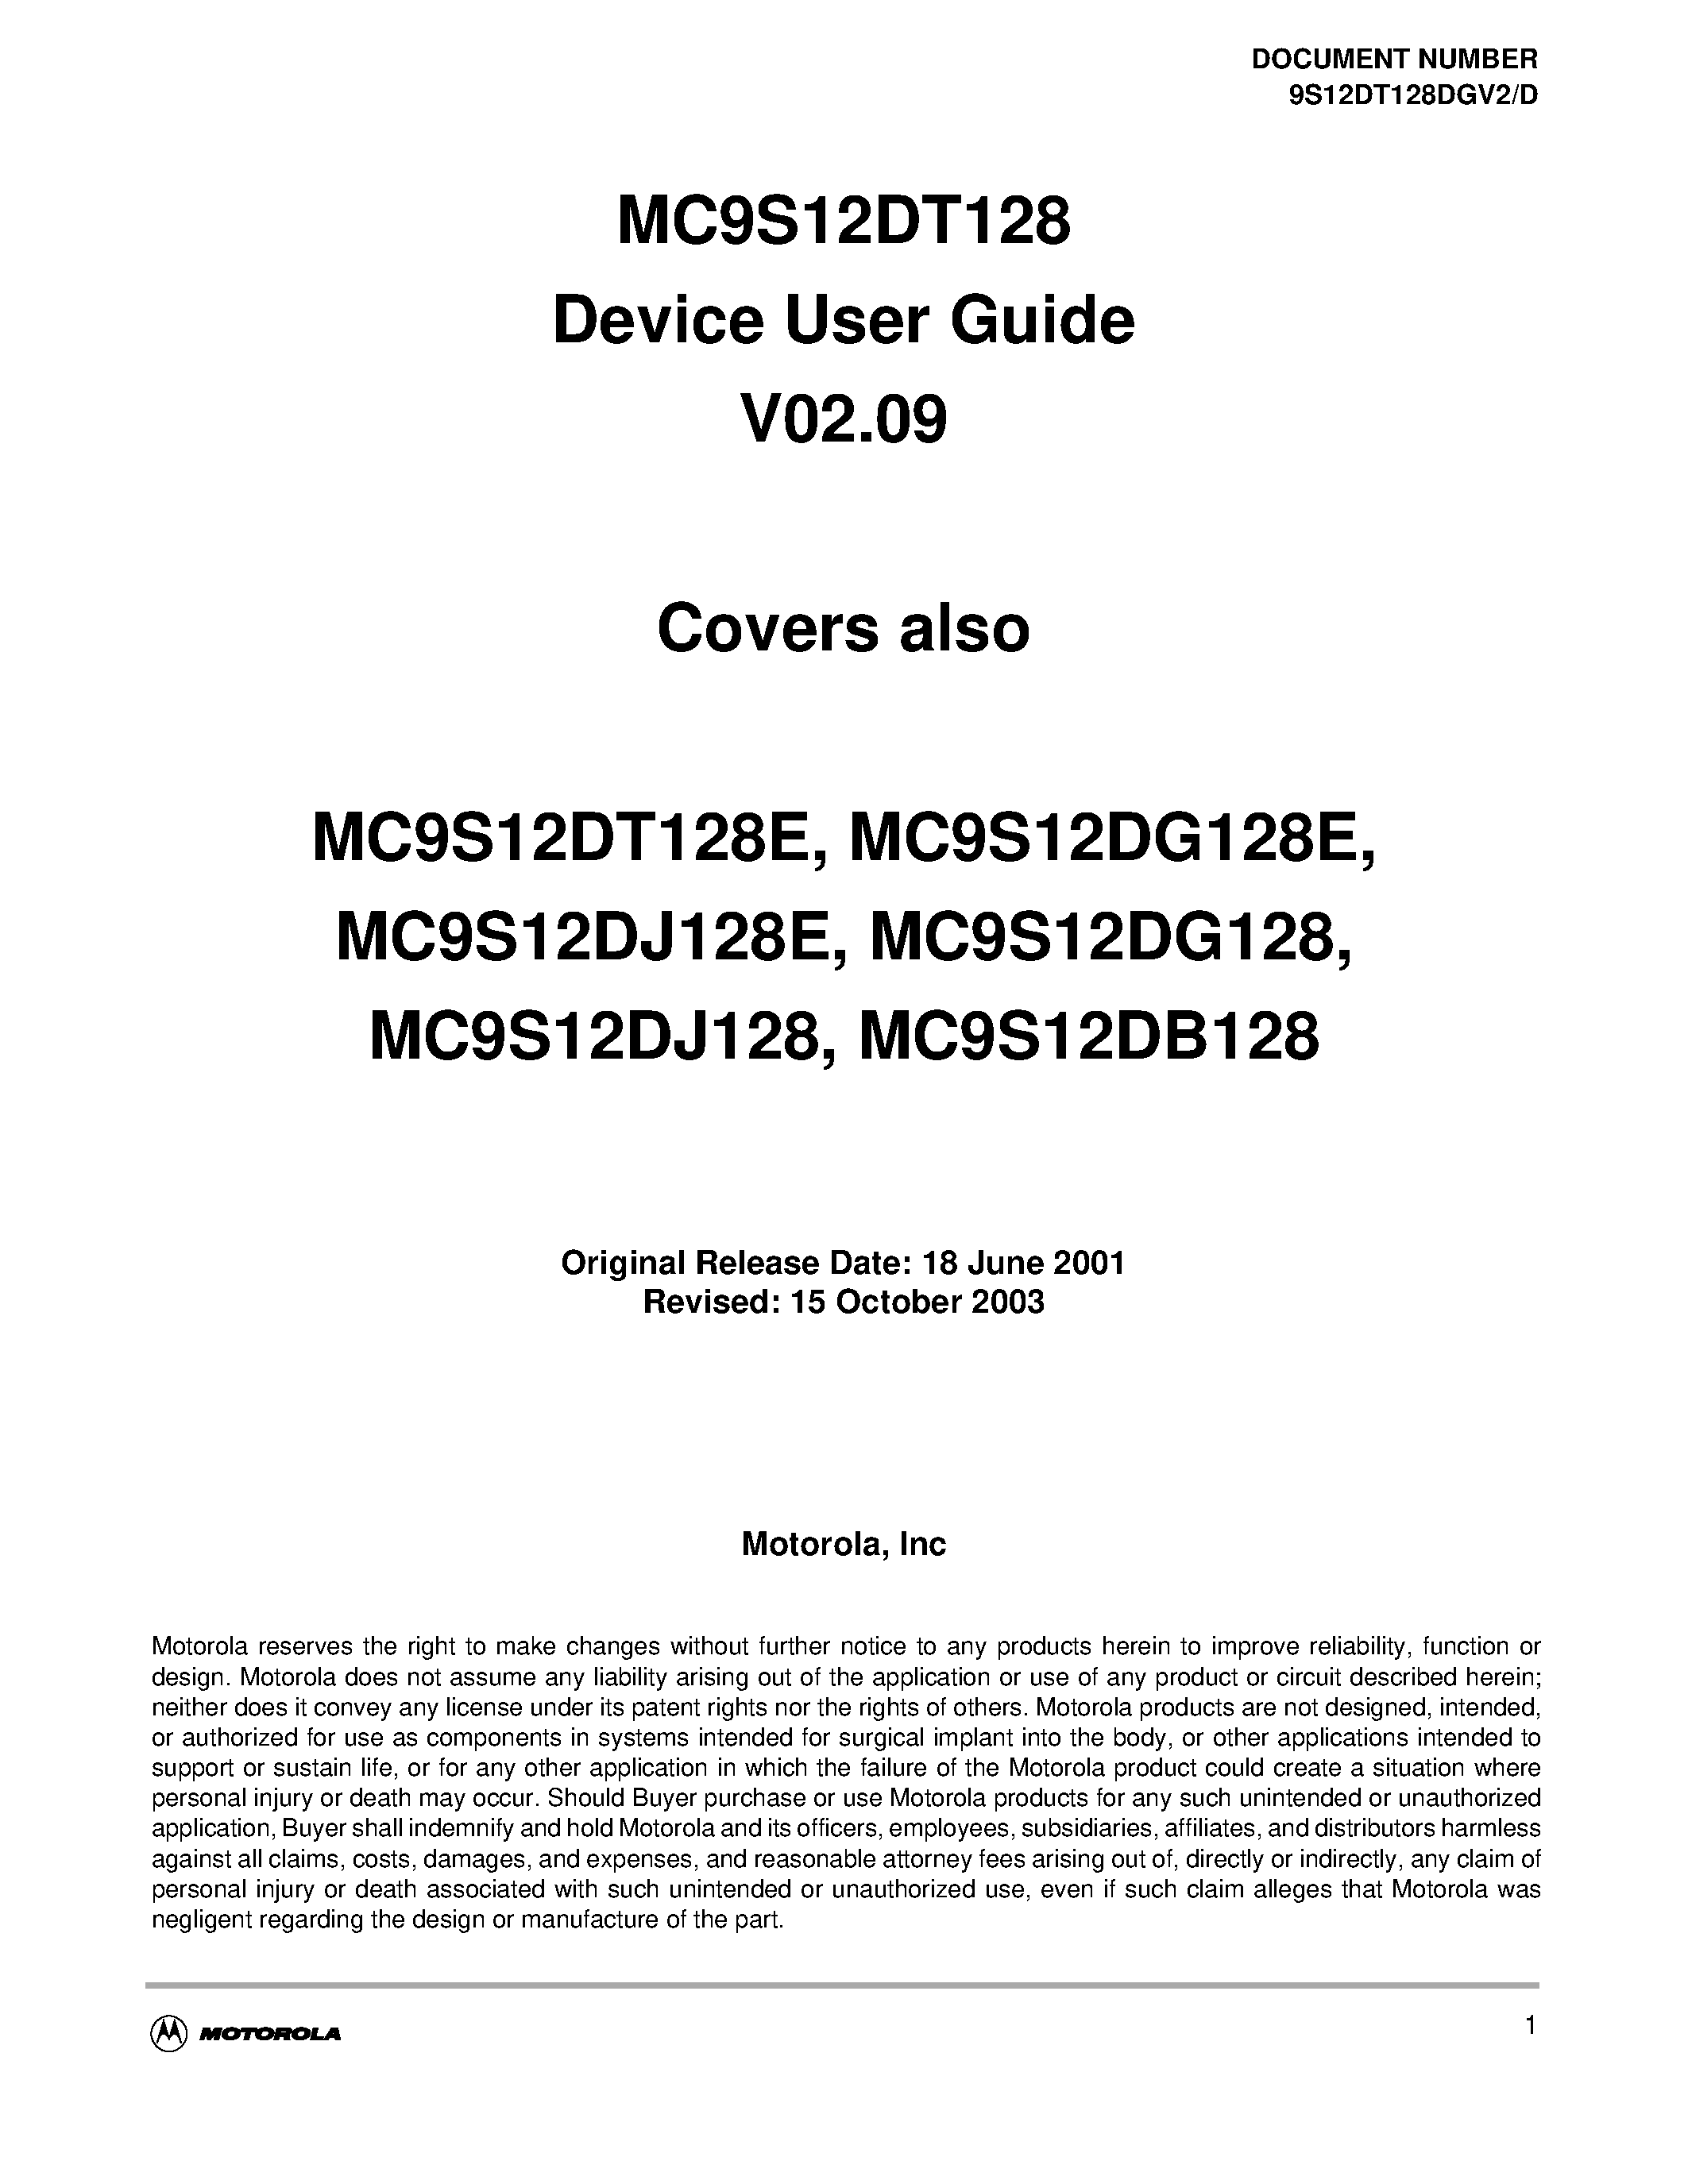 Datasheet S12INTV1D - MC9S12DT128 Device User Guide V02.09 page 1